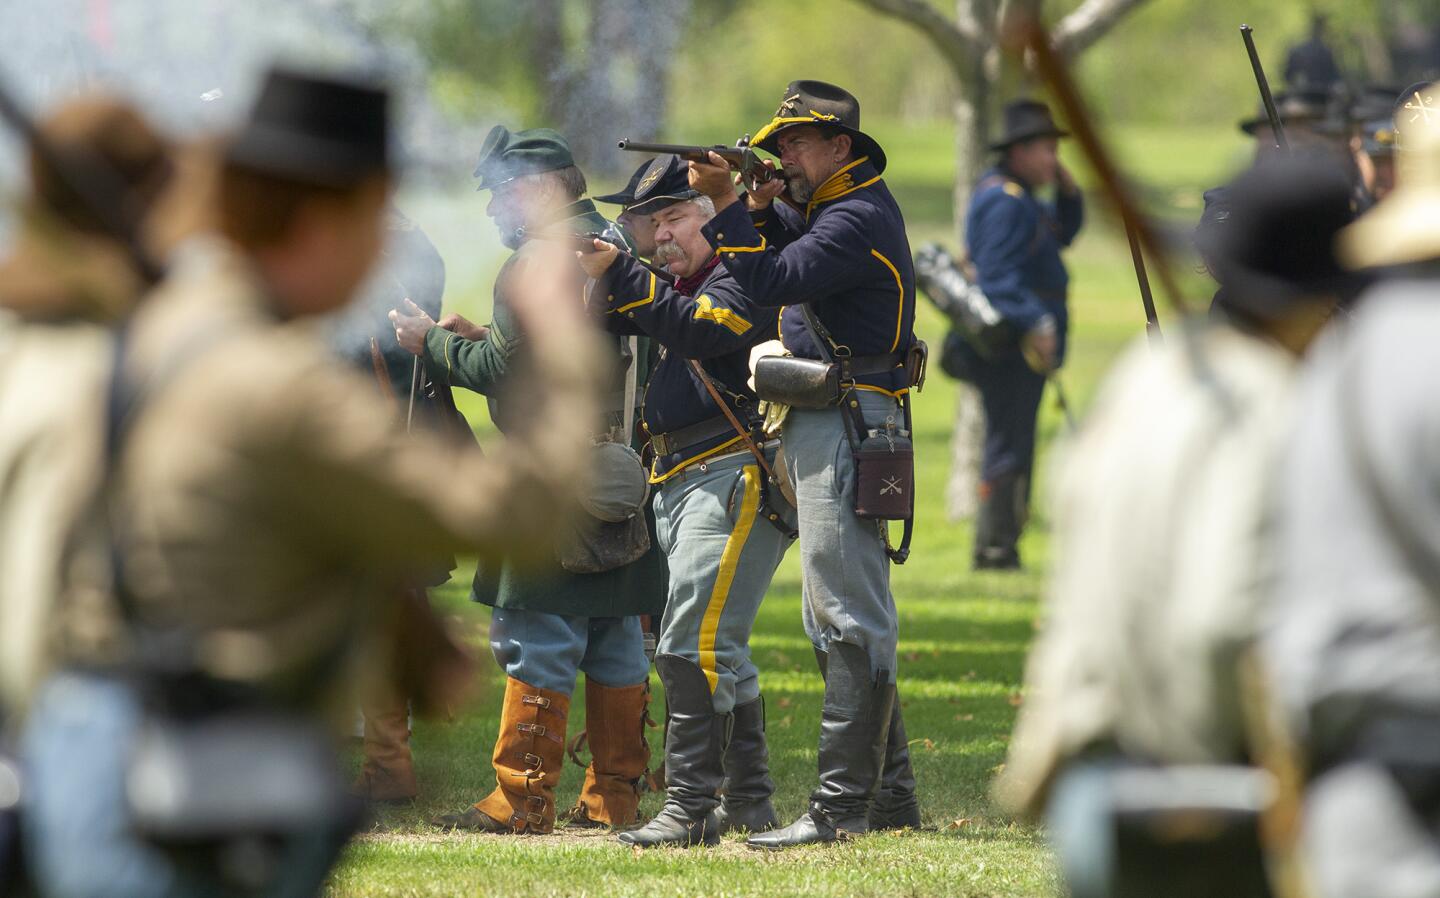 Union army soldiers fire at Confederate army soldiers during a battle at the 24th annual Civil War Days Living History Event in Huntington Beach Central Park on Saturday, September 1.